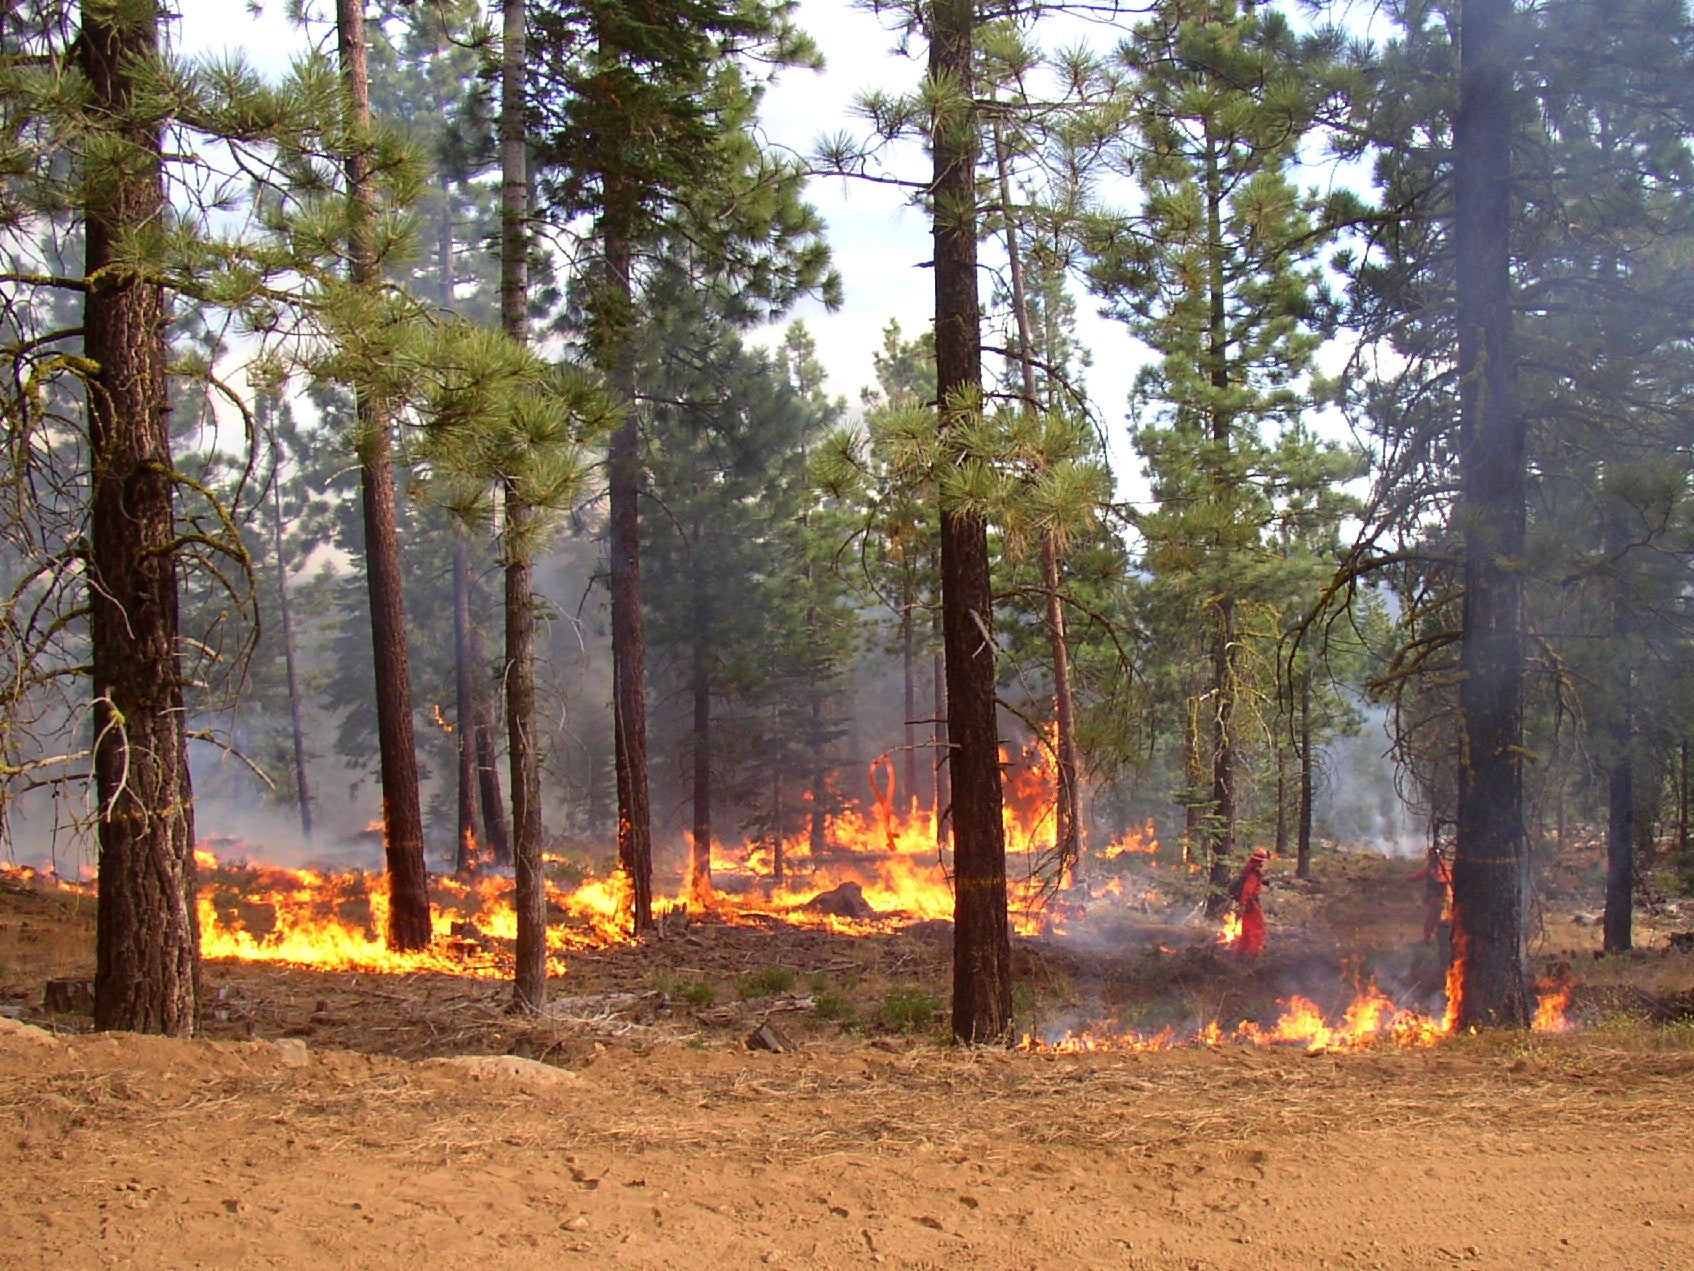 Controlled burning of natural environments such as forests could help save the planet, according to new research